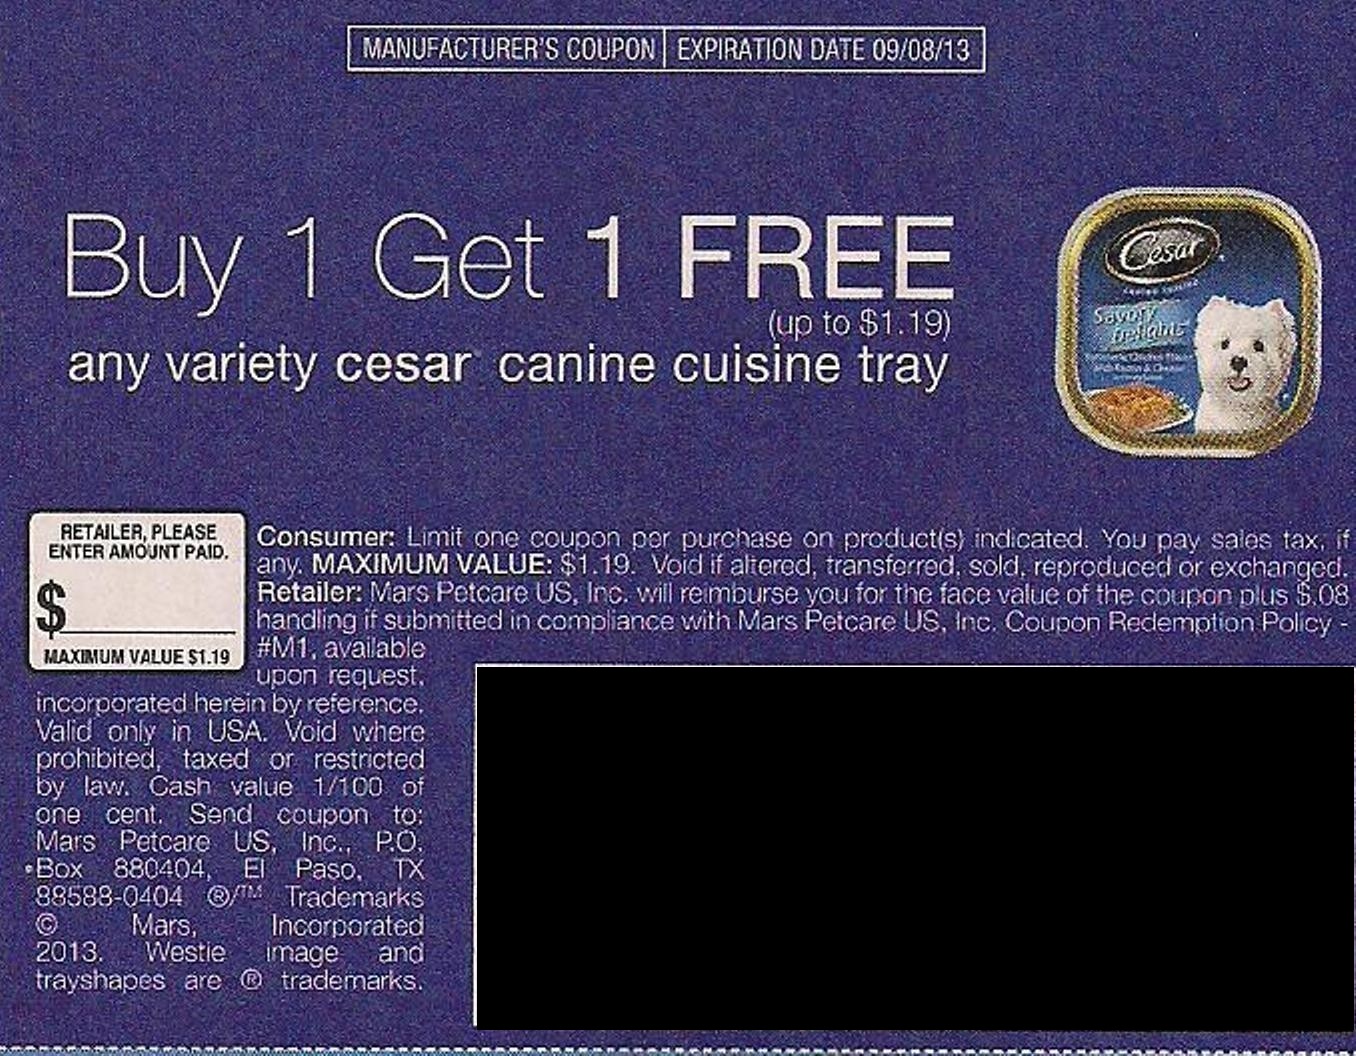 Buy 1 Get 1 FREE any variety cesar canine cuisine tray (up to $1.19) Expires 09/08/2013